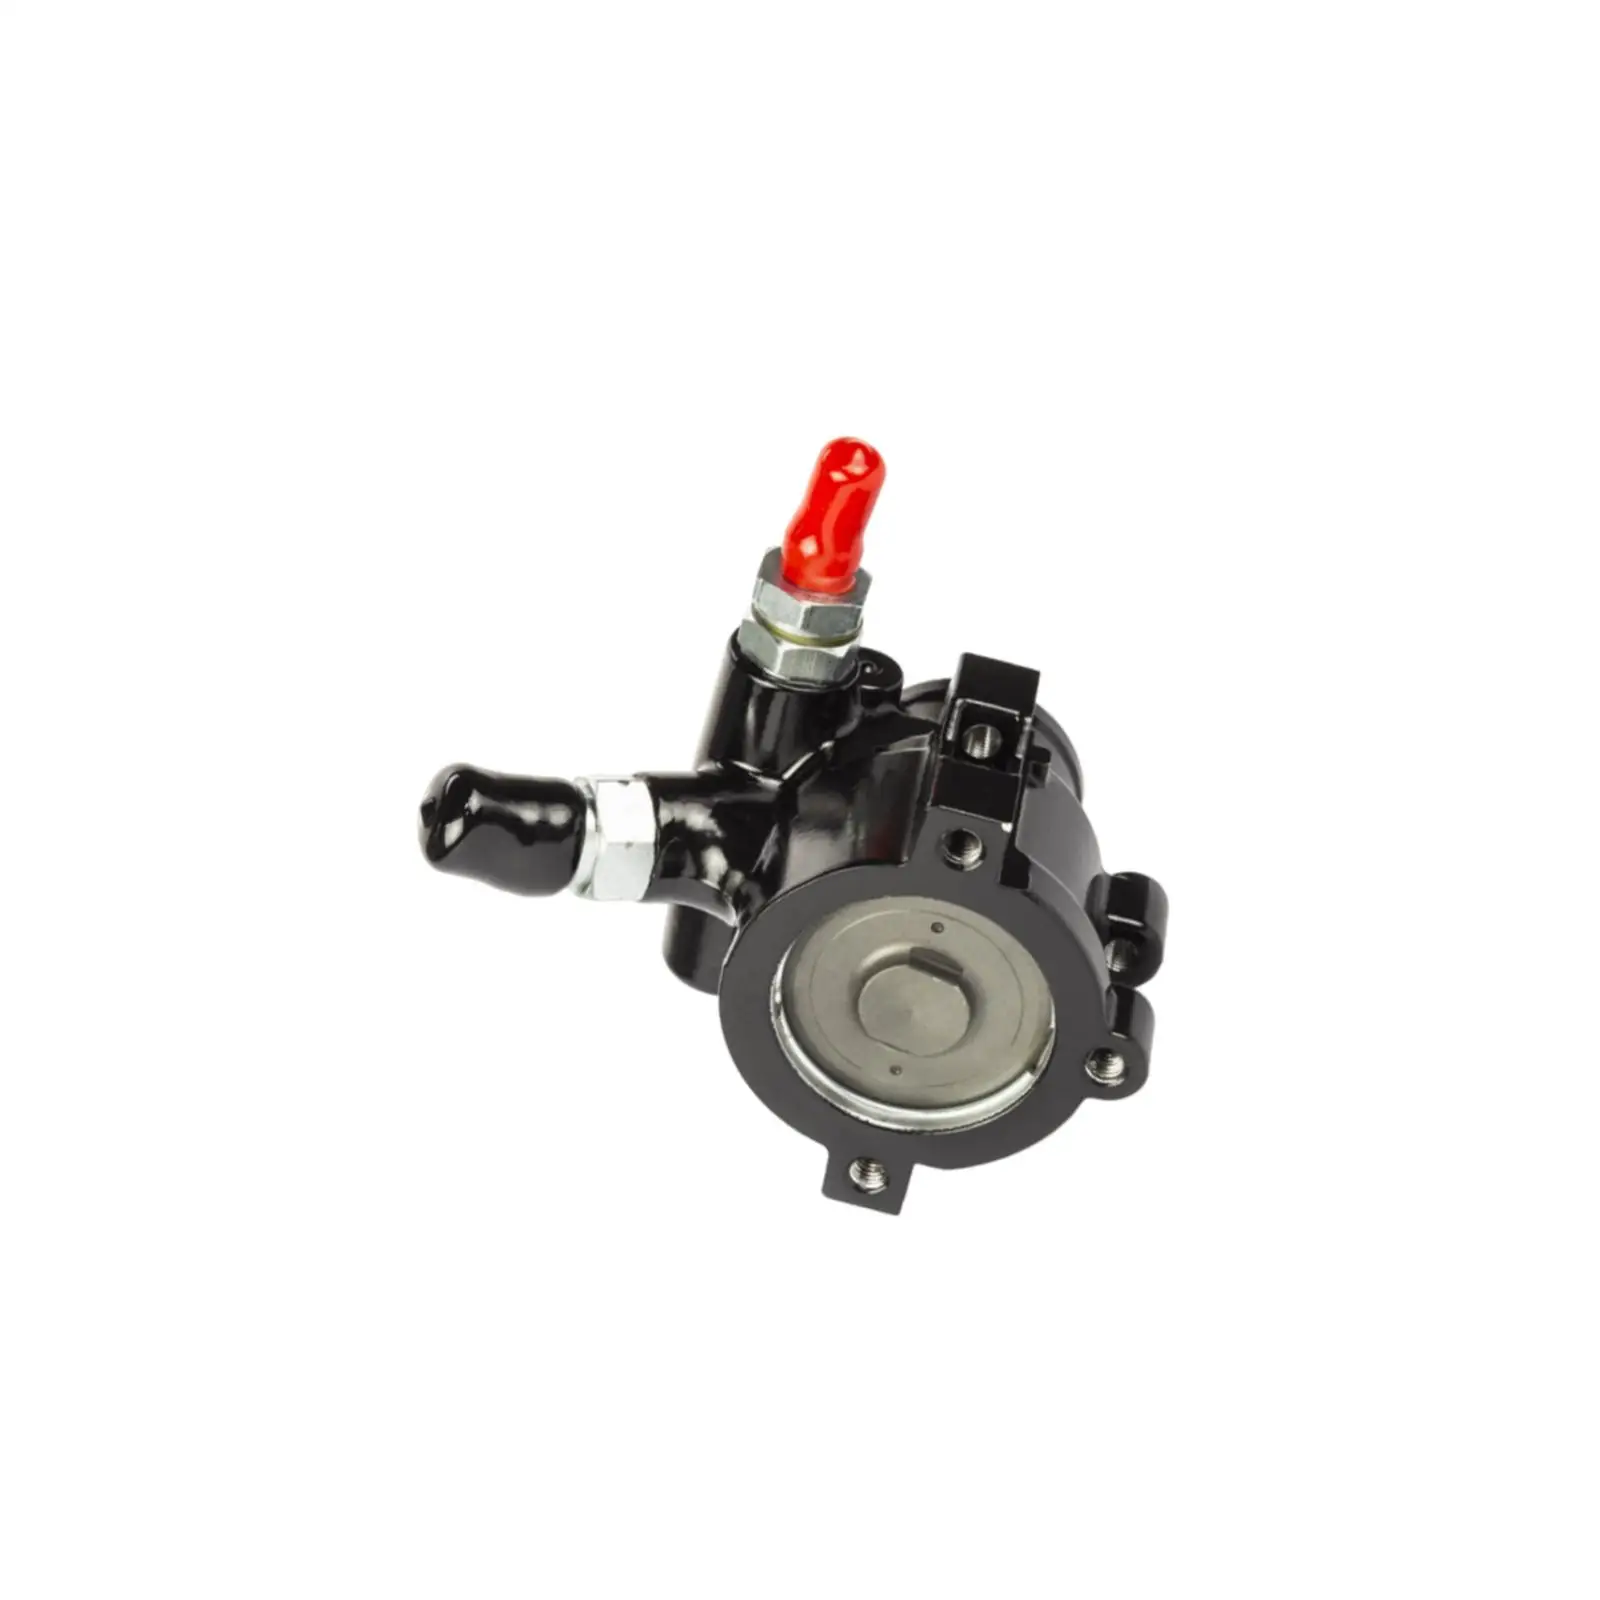 Power Steering Pump Power Assist Pump Replace for Saginaw TC Type 2 Performance Sturdy Easy Installation Durable